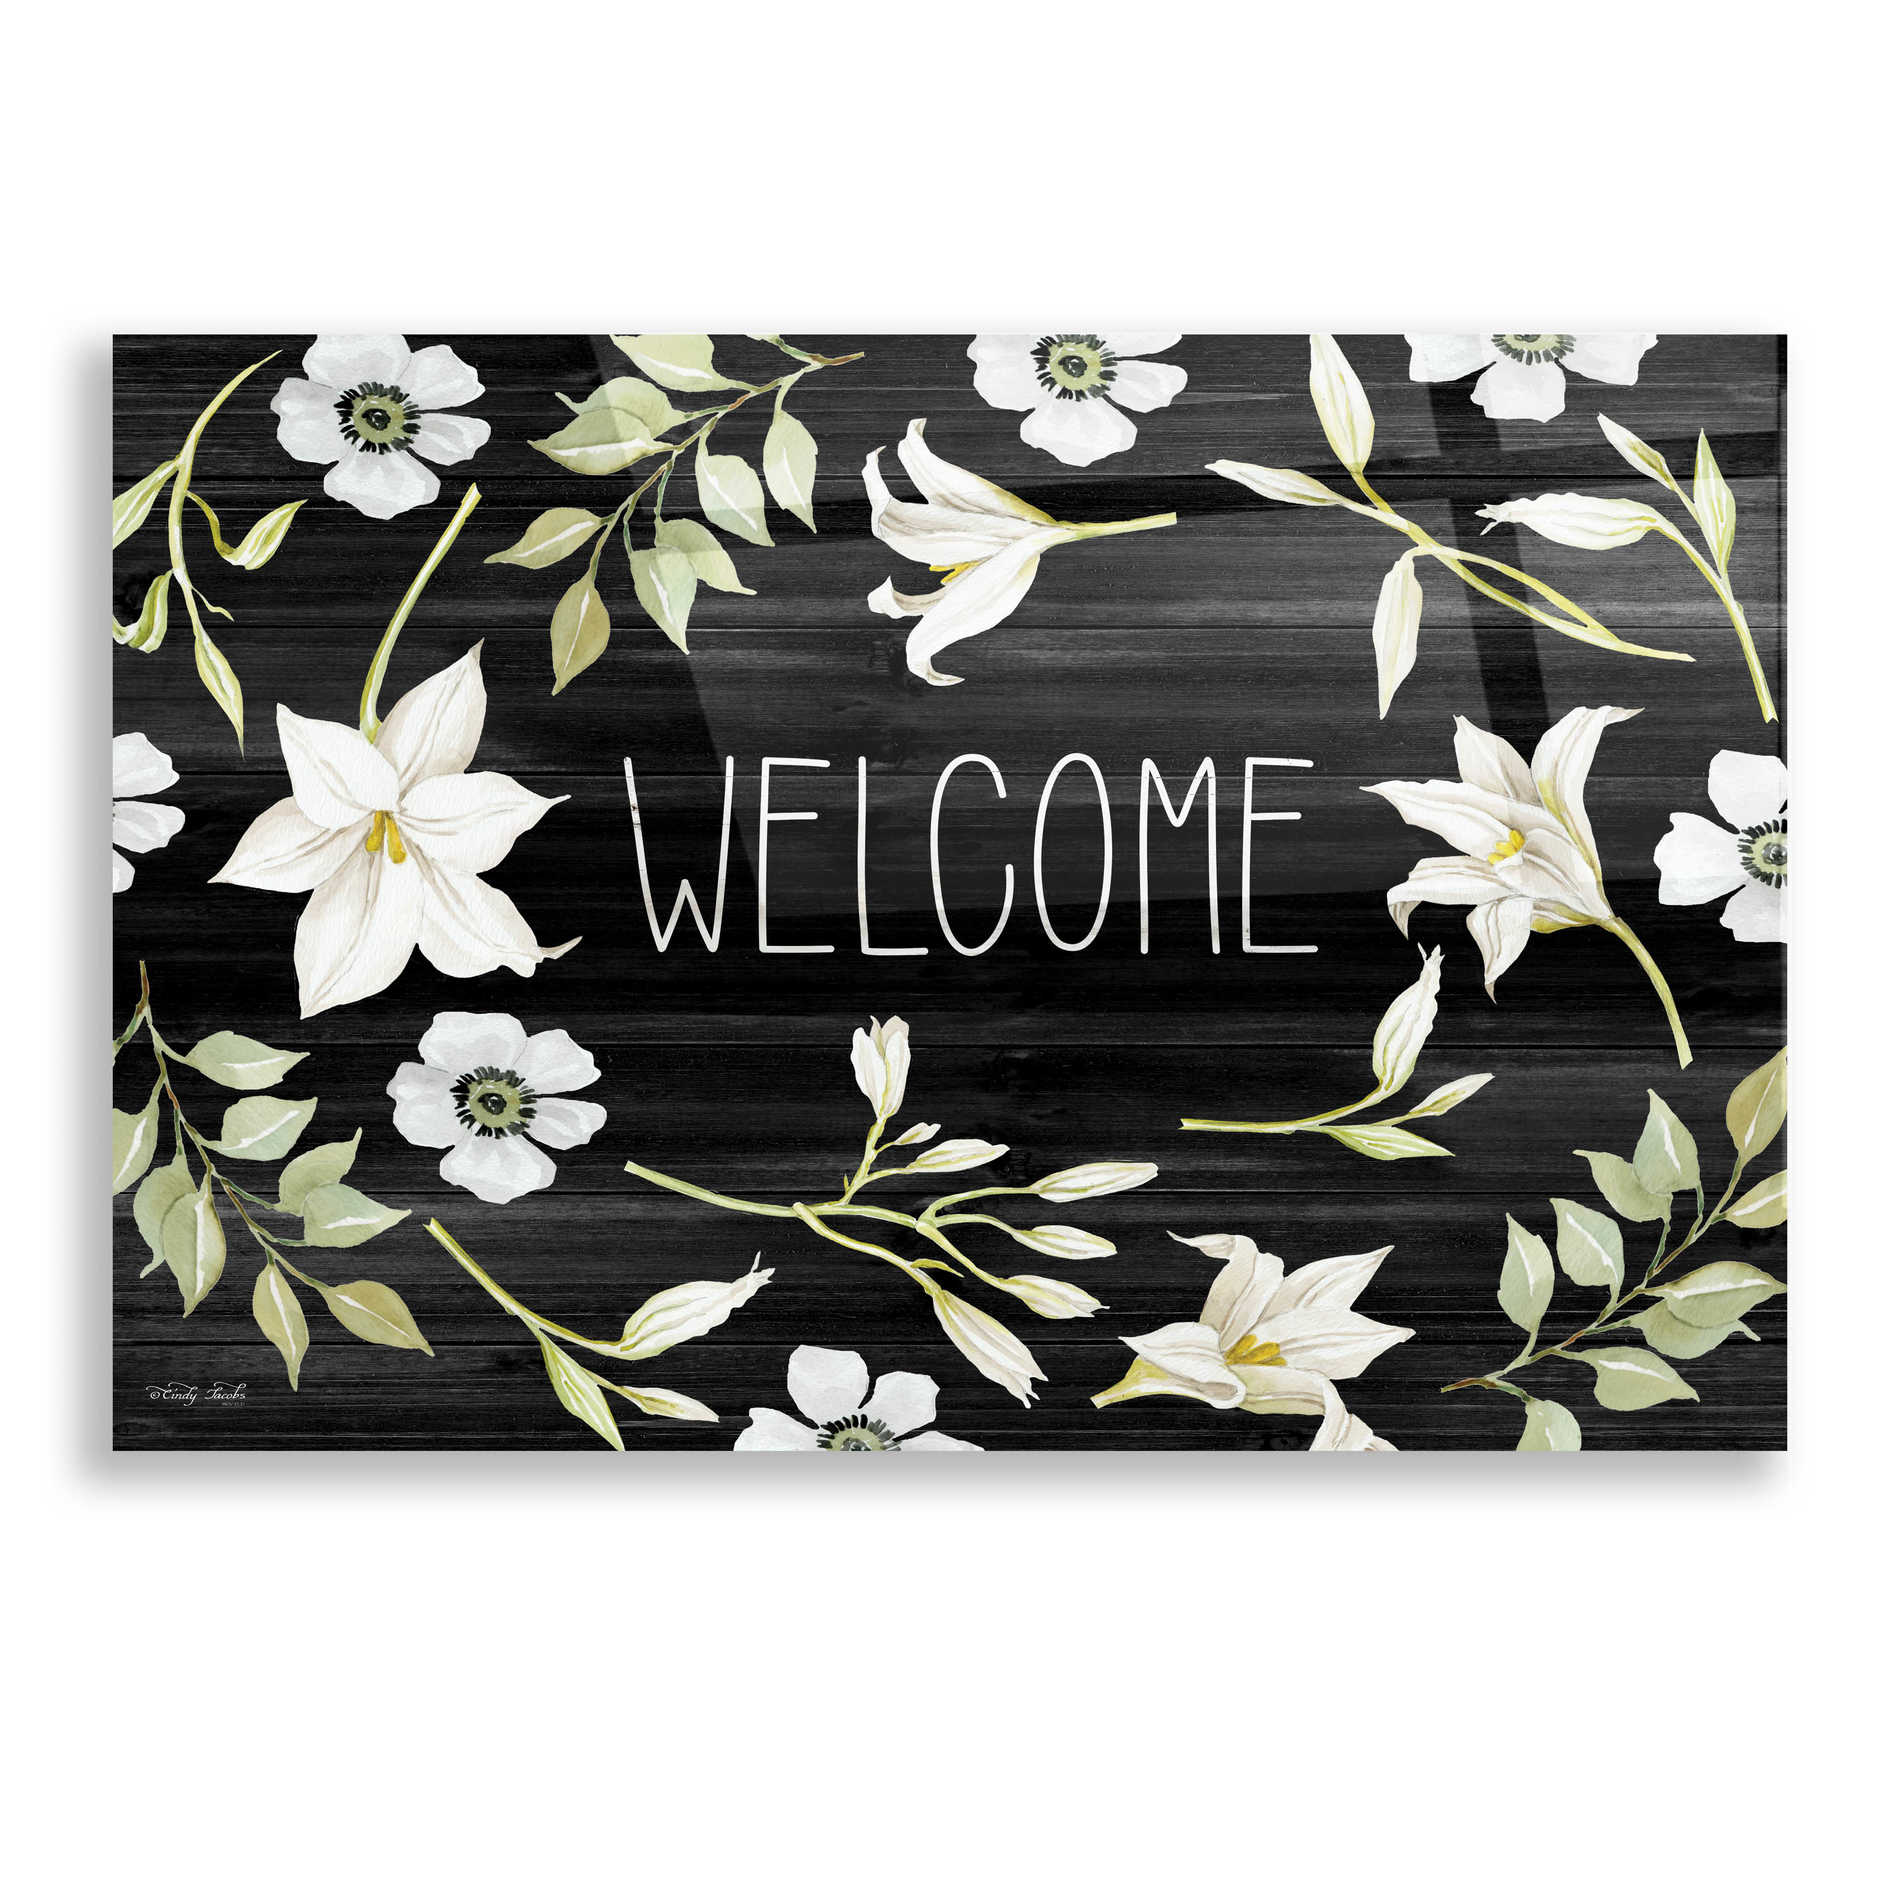 Epic Art 'Welcome Lilies' by Cindy Jacobs, Acrylic Glass Wall Art,16x12